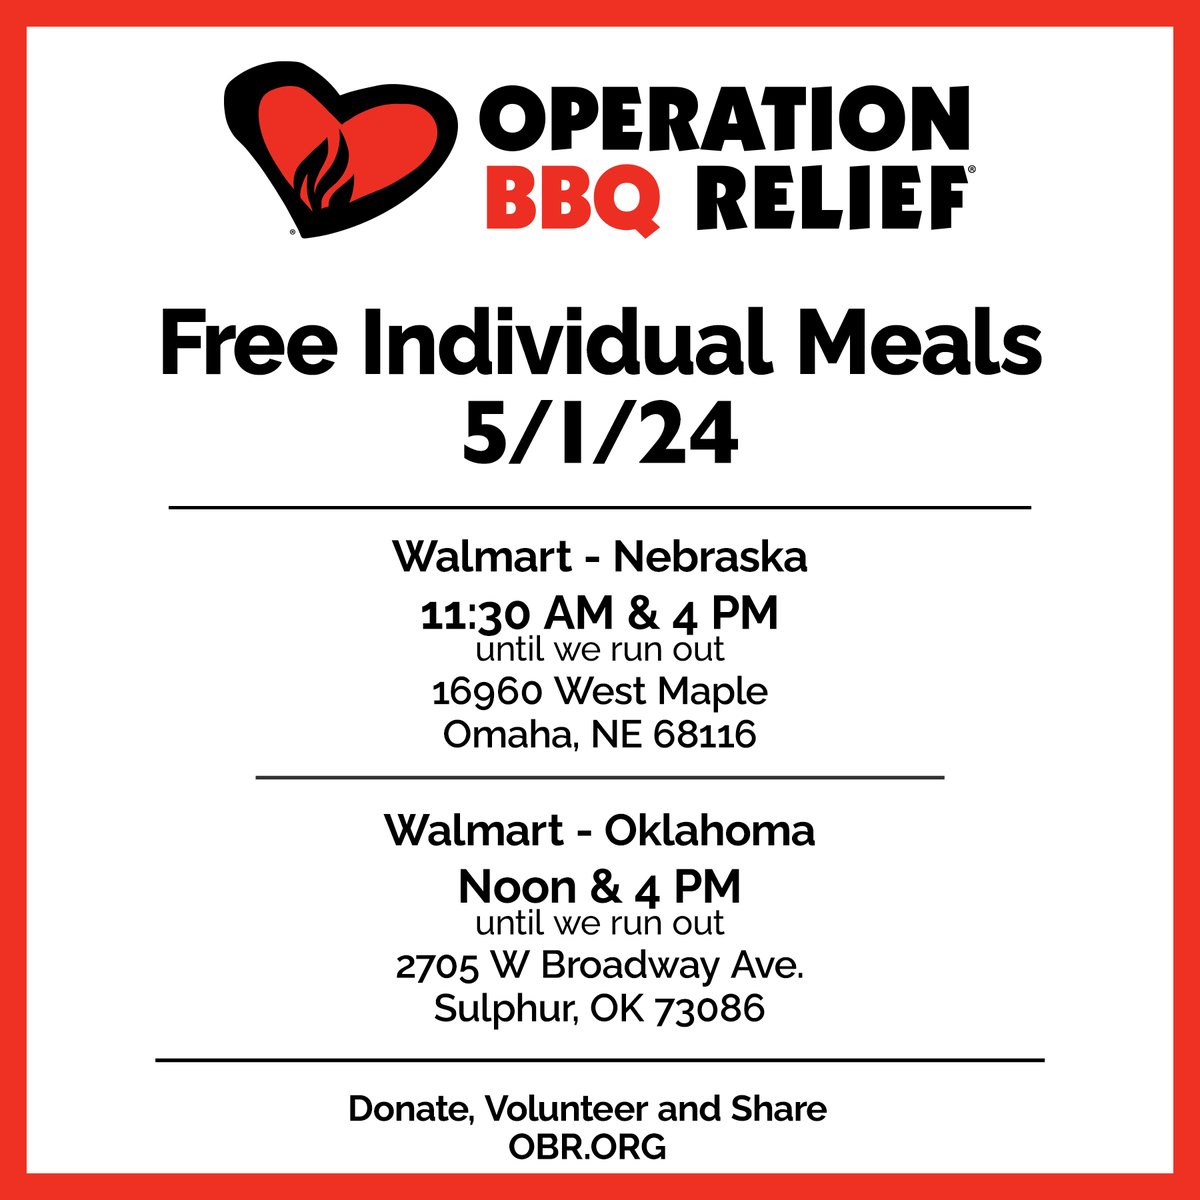 Please share today's @walmart feeding locations in Omaha, Neb. and Sulphur, Okla. with your friends and family, and follow our social media for daily updates. Please donate at /OBR.org. #disasterresponse